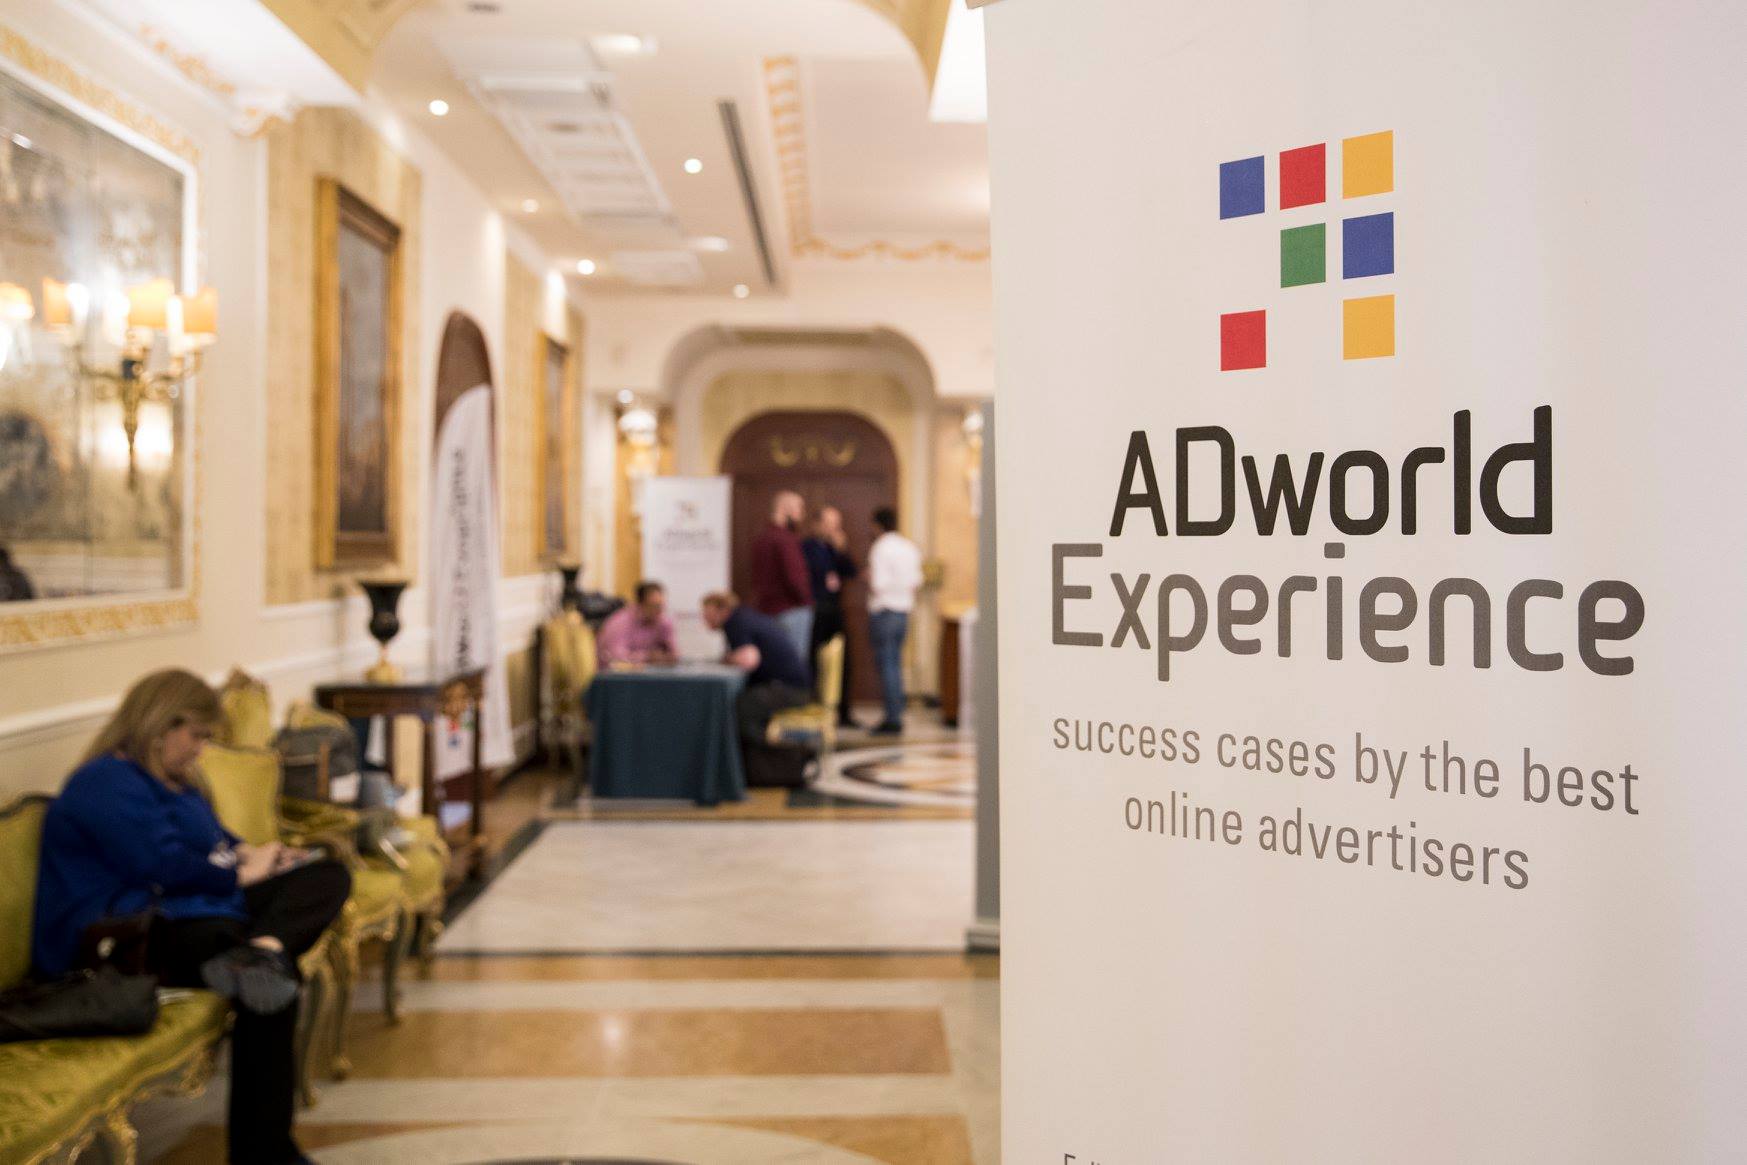 ADWorld Experience: Acquista i Tickets in Promo Early Birds!